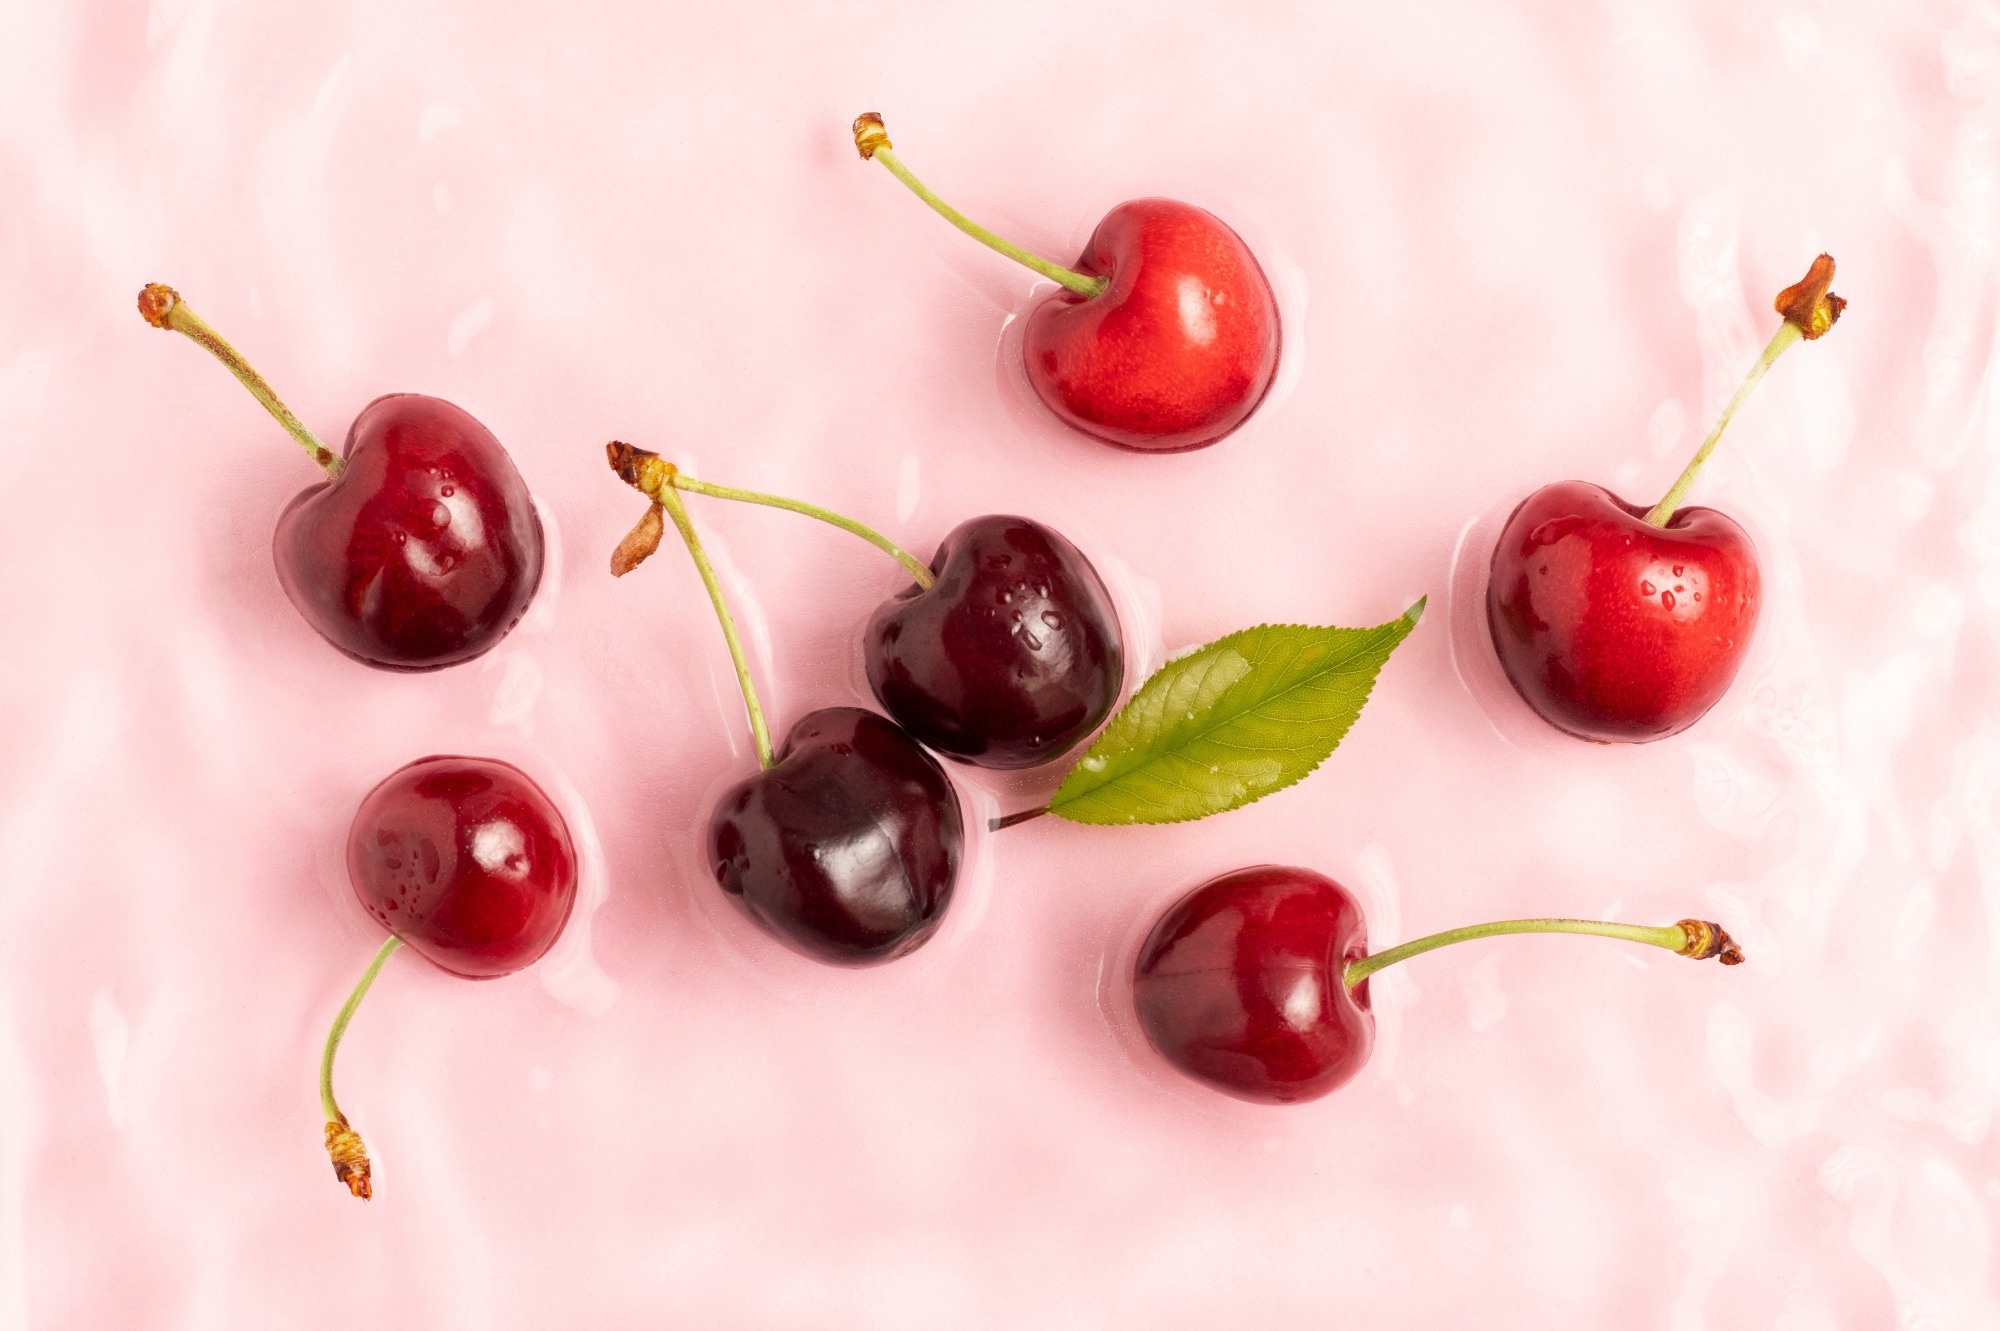 Study: Tart Cherry (Prunus cerasus L.) Pit Extracts Protect Human Skin Cells against Oxidative Stress: Unlocking Sustainable Uses for Food Industry By-products. Image Credit: Serhii Ivashchuk / Shutterstock.com